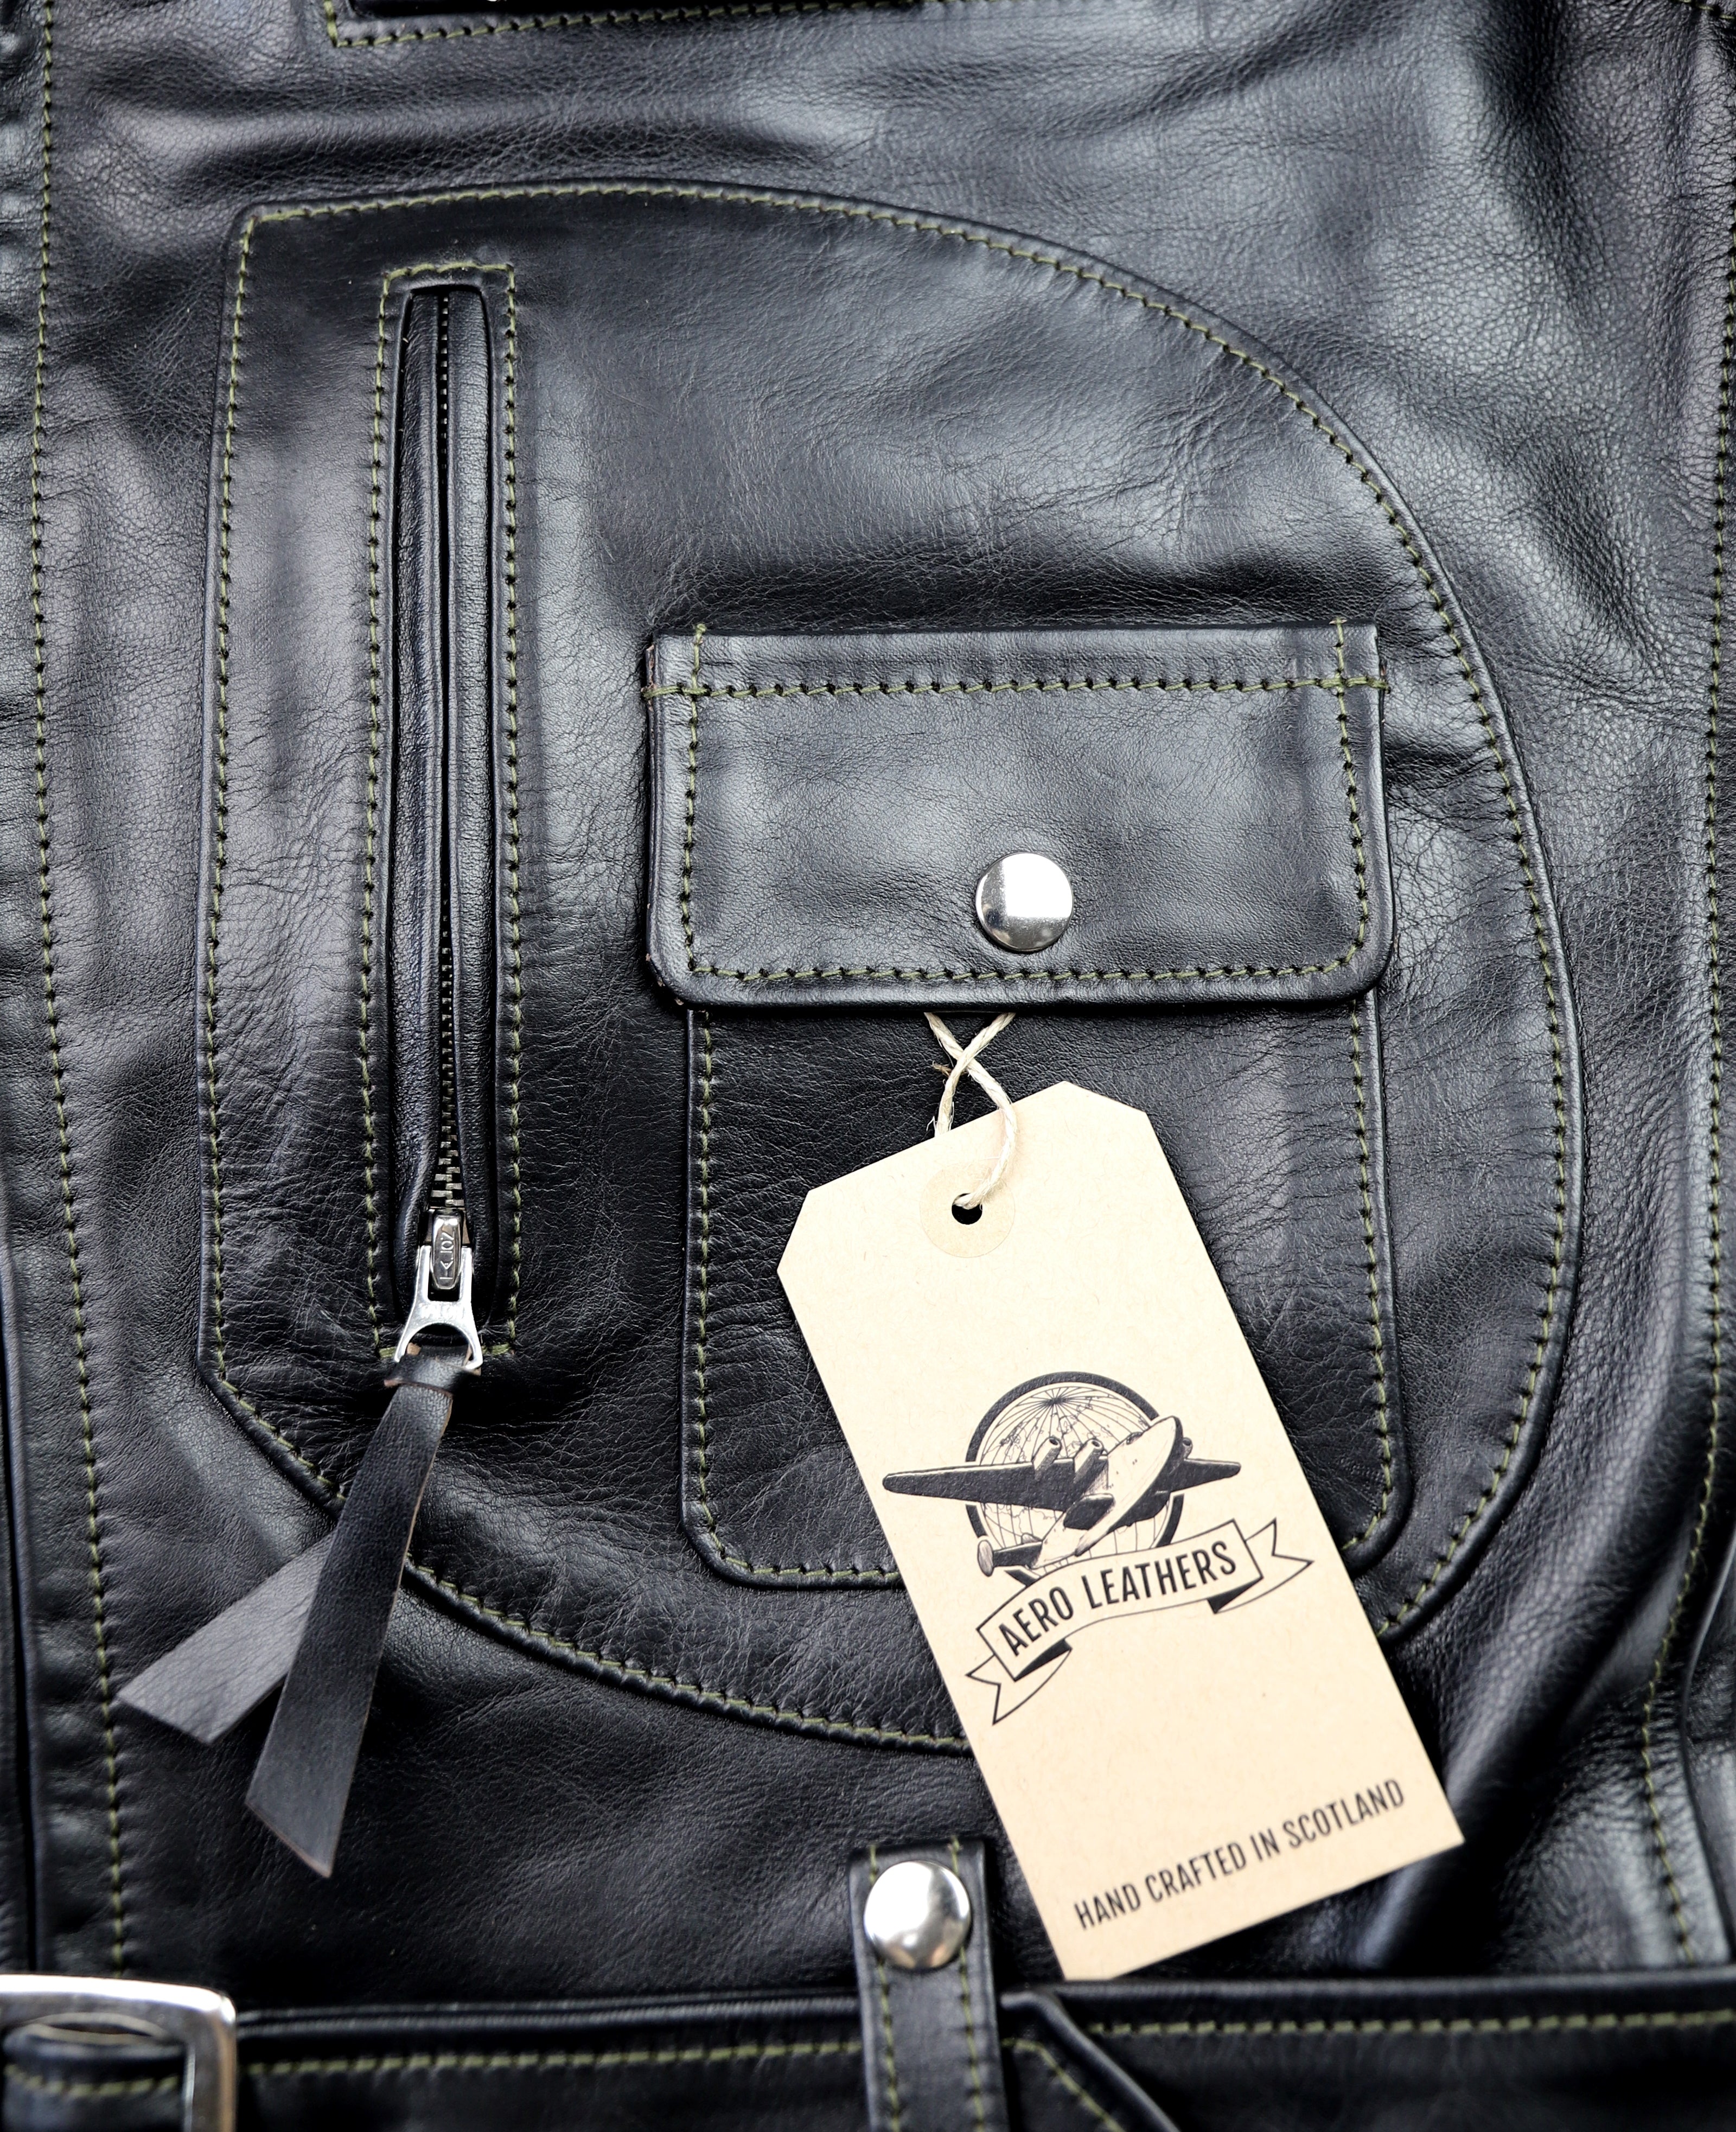 Aero D-Pocket Ridley, size 38, Blackened Brown Vicenza Horsehide